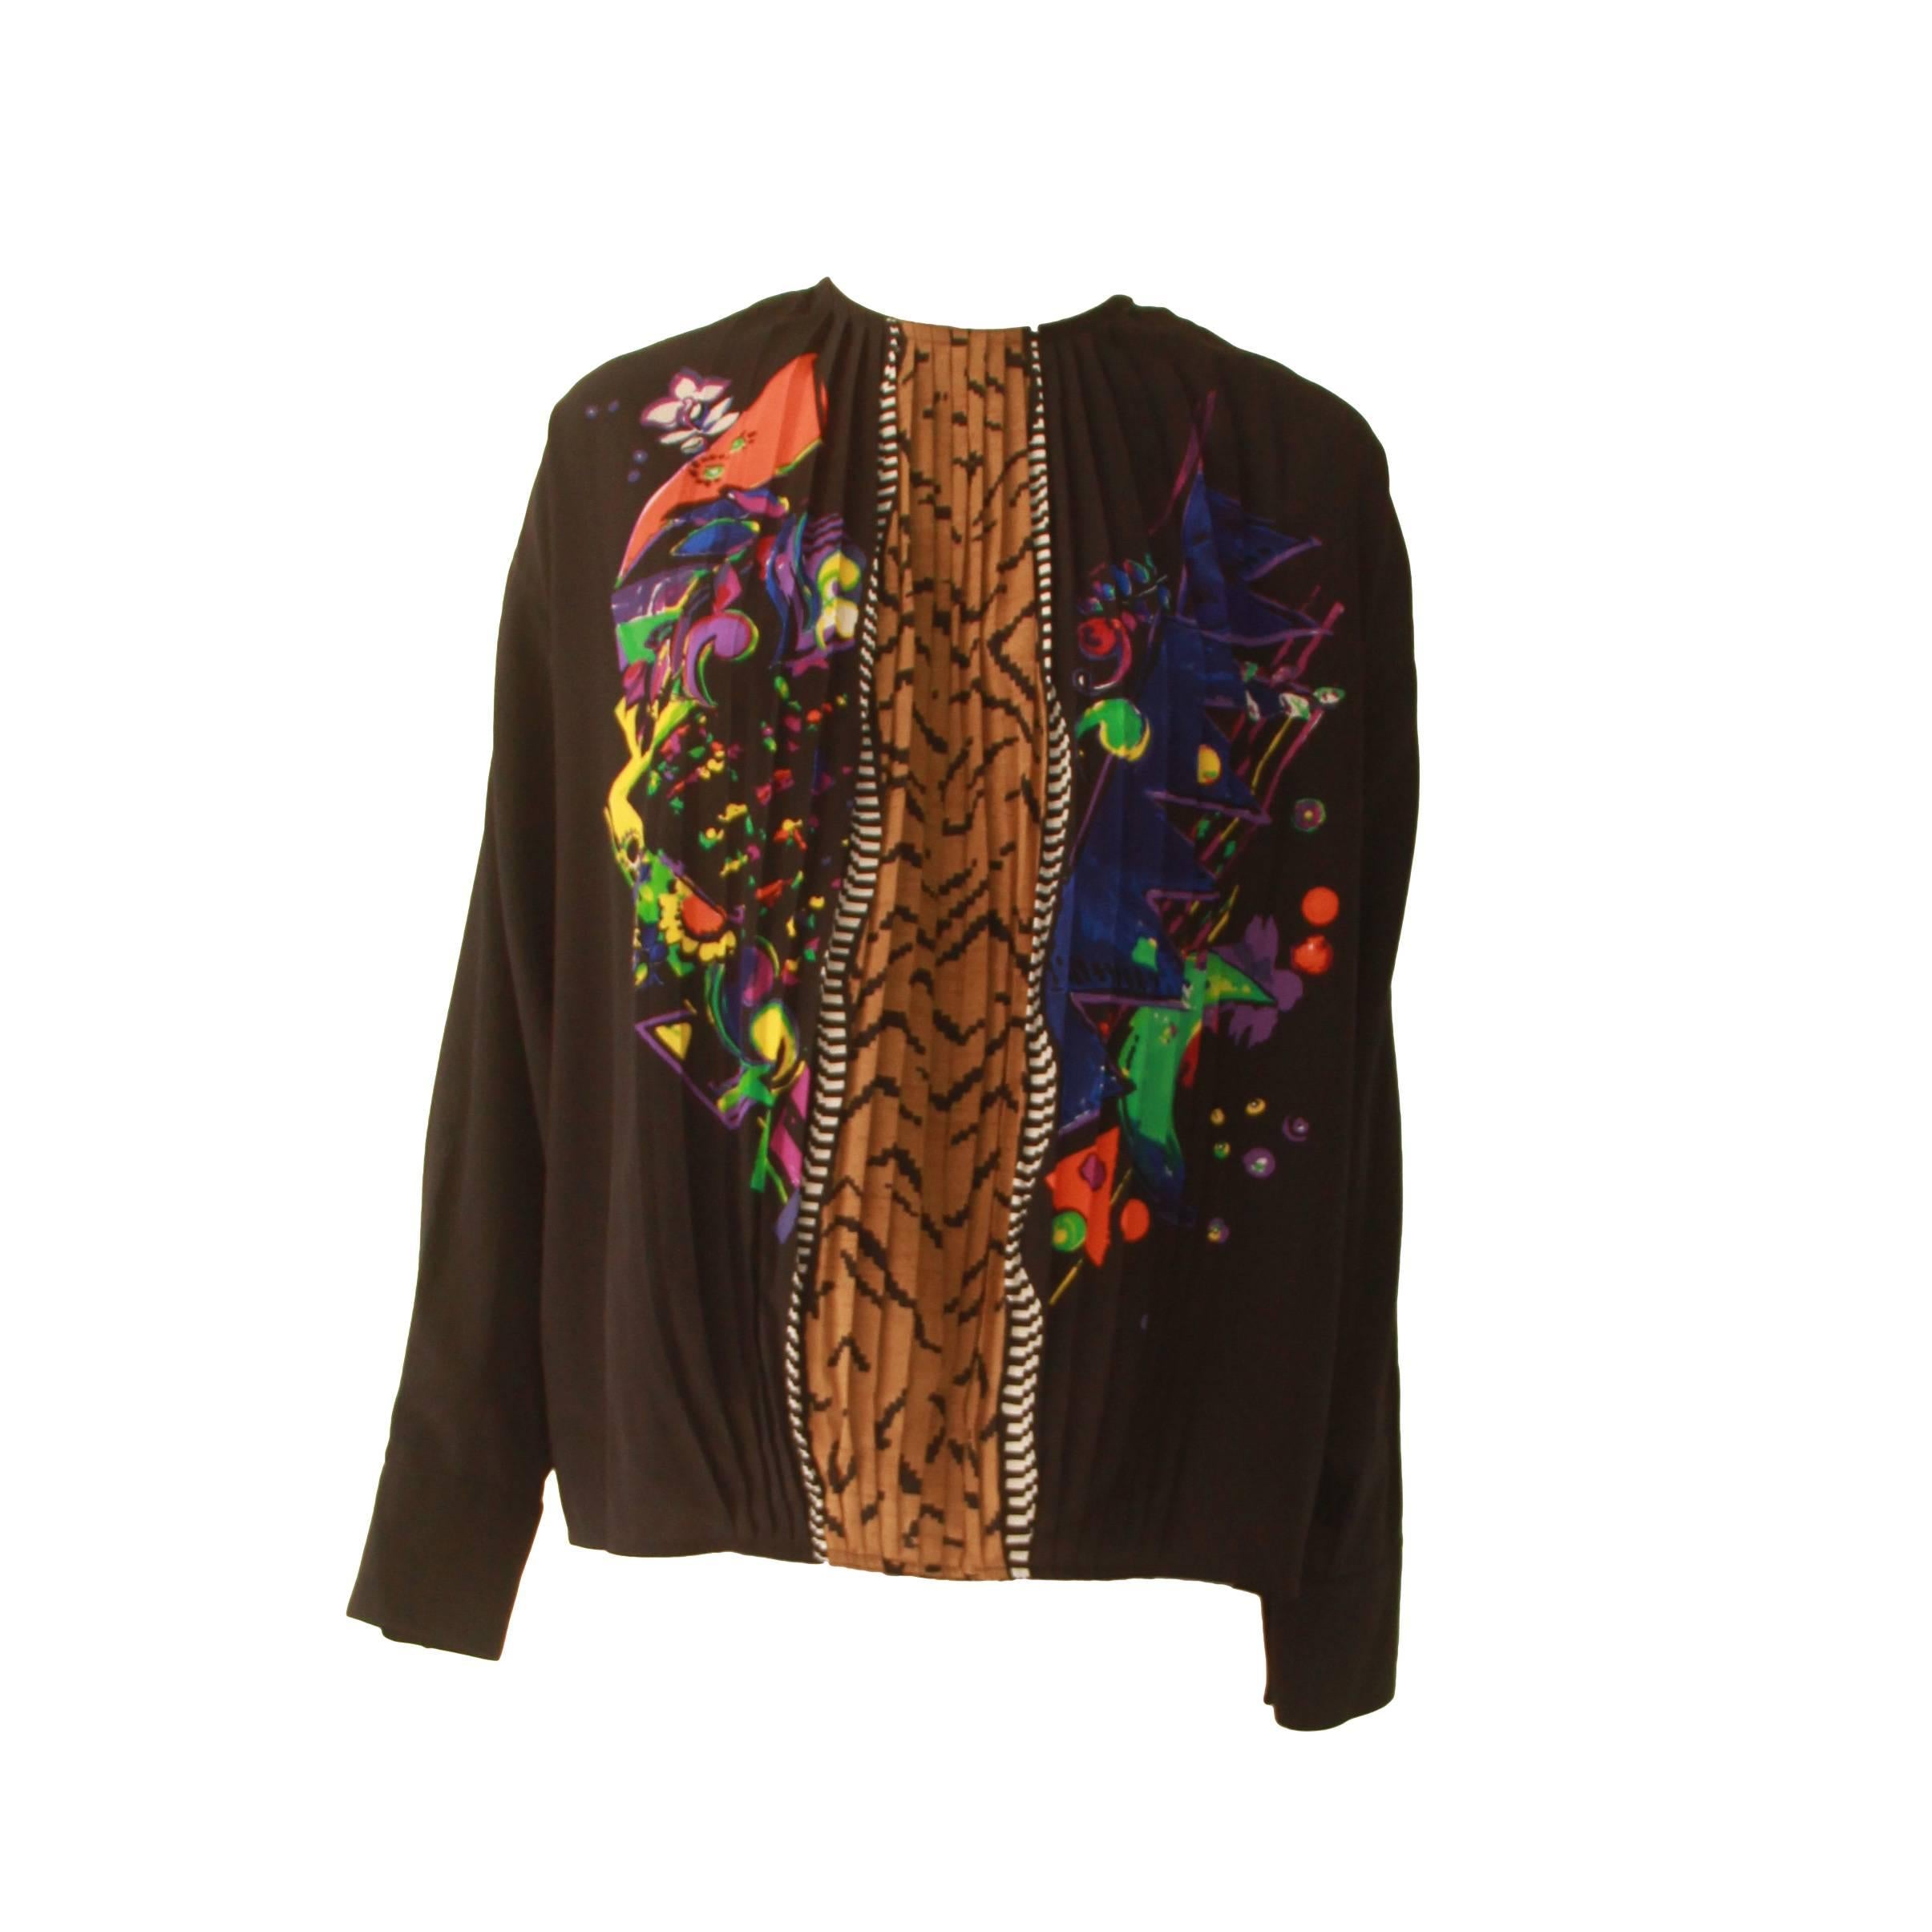 Very Rare Gianni Versace Silk Plisse Printed Shirt Fall 1989 For Sale